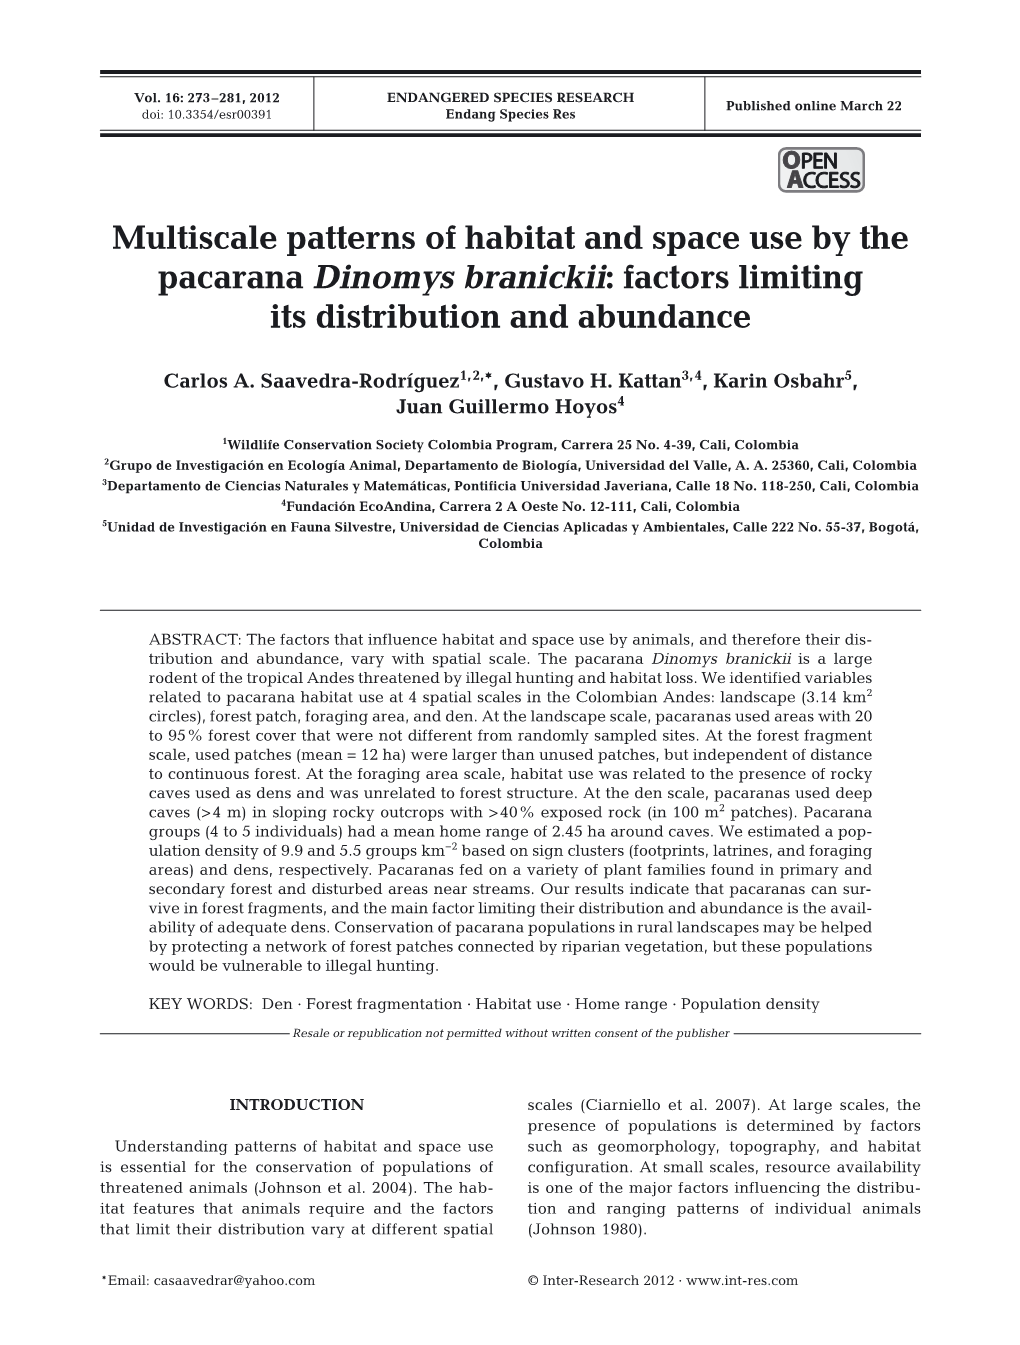 Multiscale Patterns of Habitat and Space Use by the Pacarana Dinomys Branickii: Factors Limiting Its Distribution and Abundance